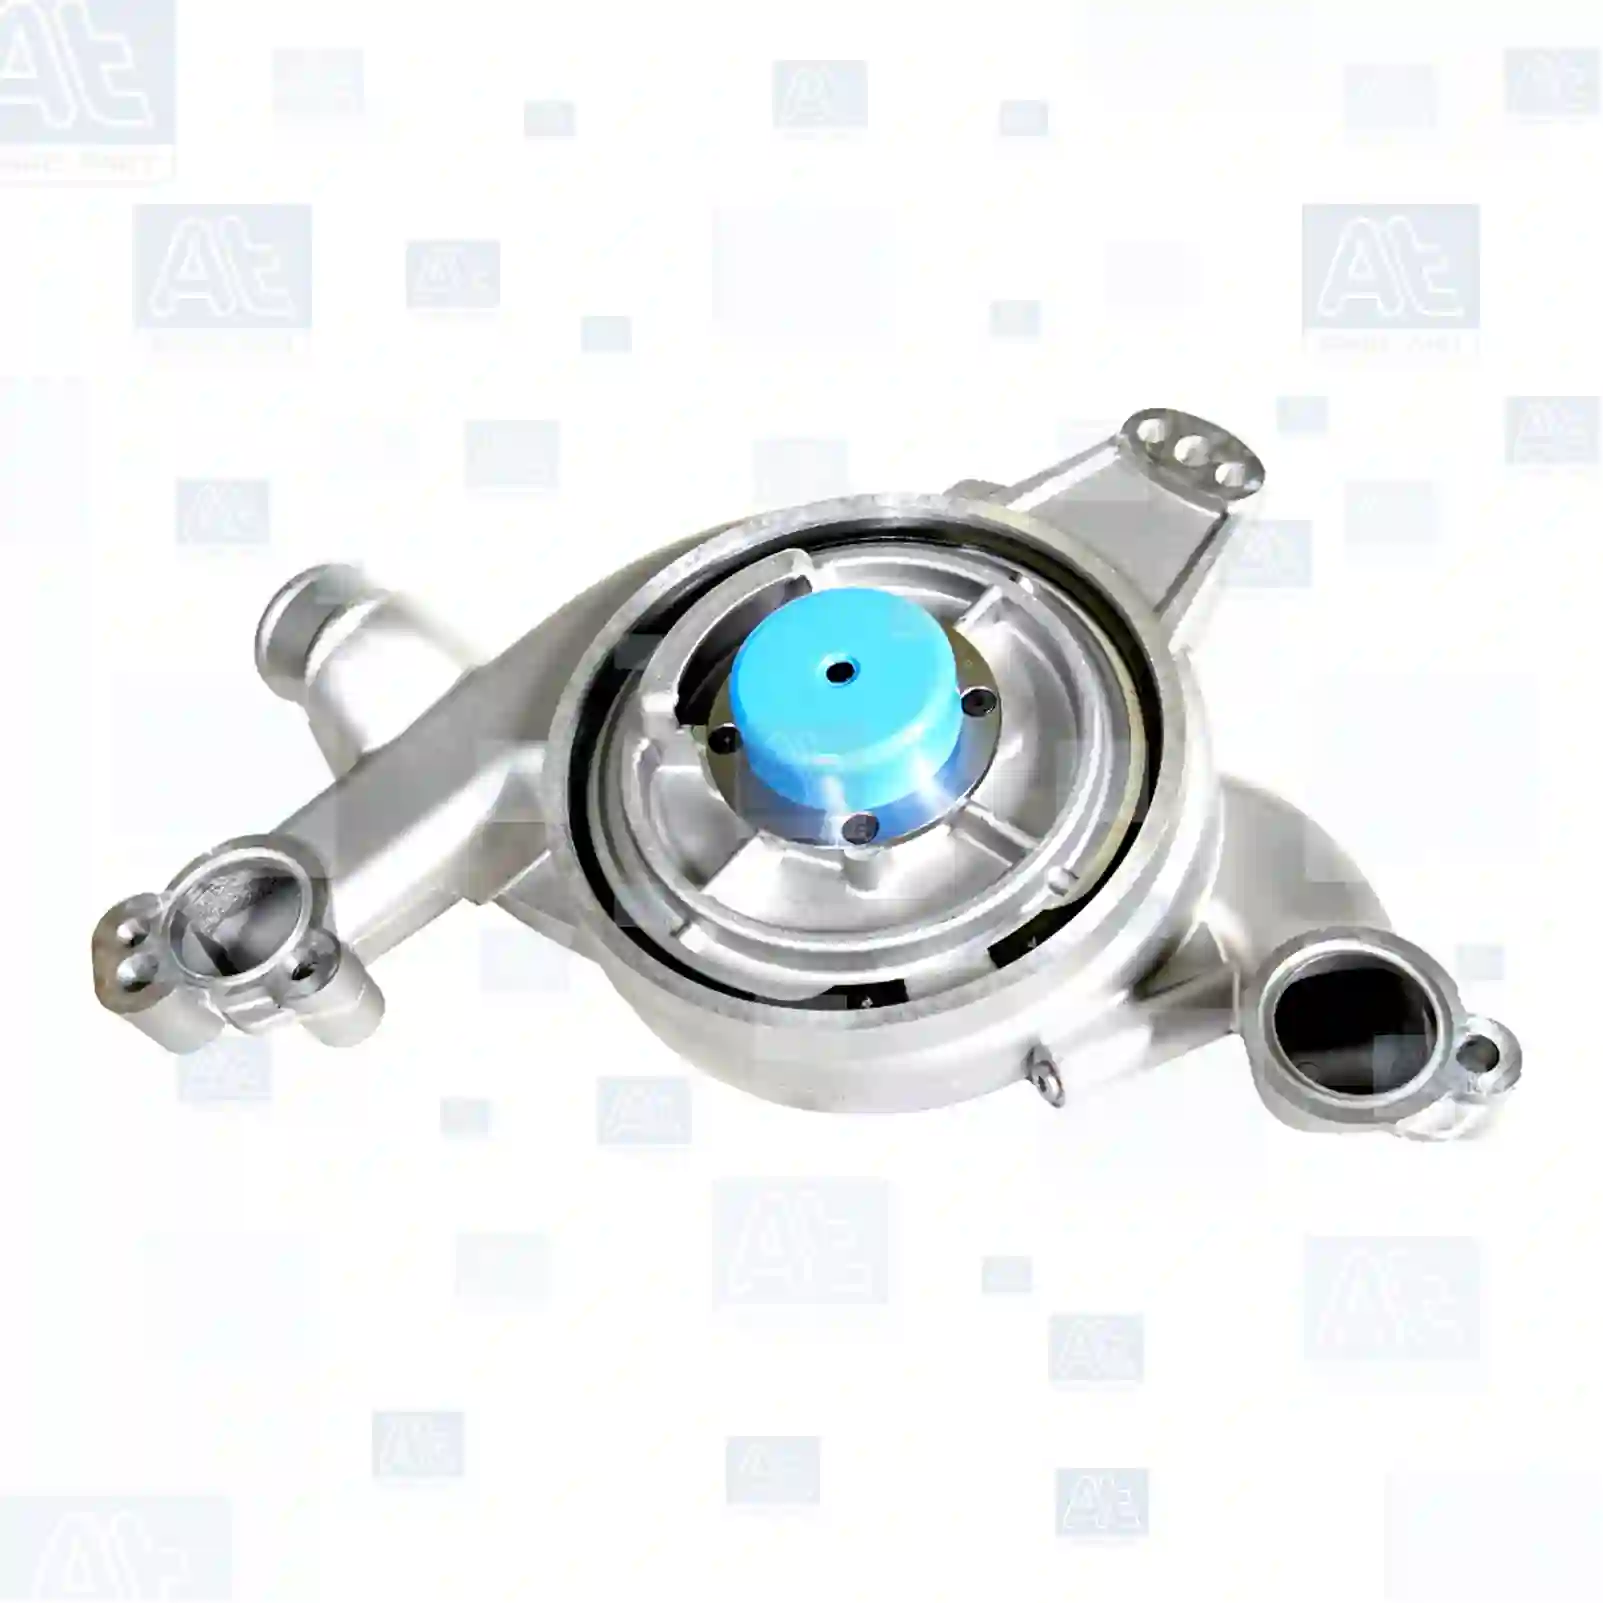 Water pump, with screws and sealing rings, 77707347, 51065000298, 51065006066, 51065007033, 51065007036, 51065007037, 51065007043, 51065007044, 51065007045, 51065007047, 51065007048, 51065007051, 51065007052, 51065007065, 51065007066, 51065007088, 51065007089, 51065009033, 51065009036, 51065009037, 51065009043, 51065009044, 51065009045, 51065009047, 51065009048, 51065009051, 51065009052, 51065009065, 51065009066, 51065009089, 51065010300 ||  77707347 At Spare Part | Engine, Accelerator Pedal, Camshaft, Connecting Rod, Crankcase, Crankshaft, Cylinder Head, Engine Suspension Mountings, Exhaust Manifold, Exhaust Gas Recirculation, Filter Kits, Flywheel Housing, General Overhaul Kits, Engine, Intake Manifold, Oil Cleaner, Oil Cooler, Oil Filter, Oil Pump, Oil Sump, Piston & Liner, Sensor & Switch, Timing Case, Turbocharger, Cooling System, Belt Tensioner, Coolant Filter, Coolant Pipe, Corrosion Prevention Agent, Drive, Expansion Tank, Fan, Intercooler, Monitors & Gauges, Radiator, Thermostat, V-Belt / Timing belt, Water Pump, Fuel System, Electronical Injector Unit, Feed Pump, Fuel Filter, cpl., Fuel Gauge Sender,  Fuel Line, Fuel Pump, Fuel Tank, Injection Line Kit, Injection Pump, Exhaust System, Clutch & Pedal, Gearbox, Propeller Shaft, Axles, Brake System, Hubs & Wheels, Suspension, Leaf Spring, Universal Parts / Accessories, Steering, Electrical System, Cabin Water pump, with screws and sealing rings, 77707347, 51065000298, 51065006066, 51065007033, 51065007036, 51065007037, 51065007043, 51065007044, 51065007045, 51065007047, 51065007048, 51065007051, 51065007052, 51065007065, 51065007066, 51065007088, 51065007089, 51065009033, 51065009036, 51065009037, 51065009043, 51065009044, 51065009045, 51065009047, 51065009048, 51065009051, 51065009052, 51065009065, 51065009066, 51065009089, 51065010300 ||  77707347 At Spare Part | Engine, Accelerator Pedal, Camshaft, Connecting Rod, Crankcase, Crankshaft, Cylinder Head, Engine Suspension Mountings, Exhaust Manifold, Exhaust Gas Recirculation, Filter Kits, Flywheel Housing, General Overhaul Kits, Engine, Intake Manifold, Oil Cleaner, Oil Cooler, Oil Filter, Oil Pump, Oil Sump, Piston & Liner, Sensor & Switch, Timing Case, Turbocharger, Cooling System, Belt Tensioner, Coolant Filter, Coolant Pipe, Corrosion Prevention Agent, Drive, Expansion Tank, Fan, Intercooler, Monitors & Gauges, Radiator, Thermostat, V-Belt / Timing belt, Water Pump, Fuel System, Electronical Injector Unit, Feed Pump, Fuel Filter, cpl., Fuel Gauge Sender,  Fuel Line, Fuel Pump, Fuel Tank, Injection Line Kit, Injection Pump, Exhaust System, Clutch & Pedal, Gearbox, Propeller Shaft, Axles, Brake System, Hubs & Wheels, Suspension, Leaf Spring, Universal Parts / Accessories, Steering, Electrical System, Cabin